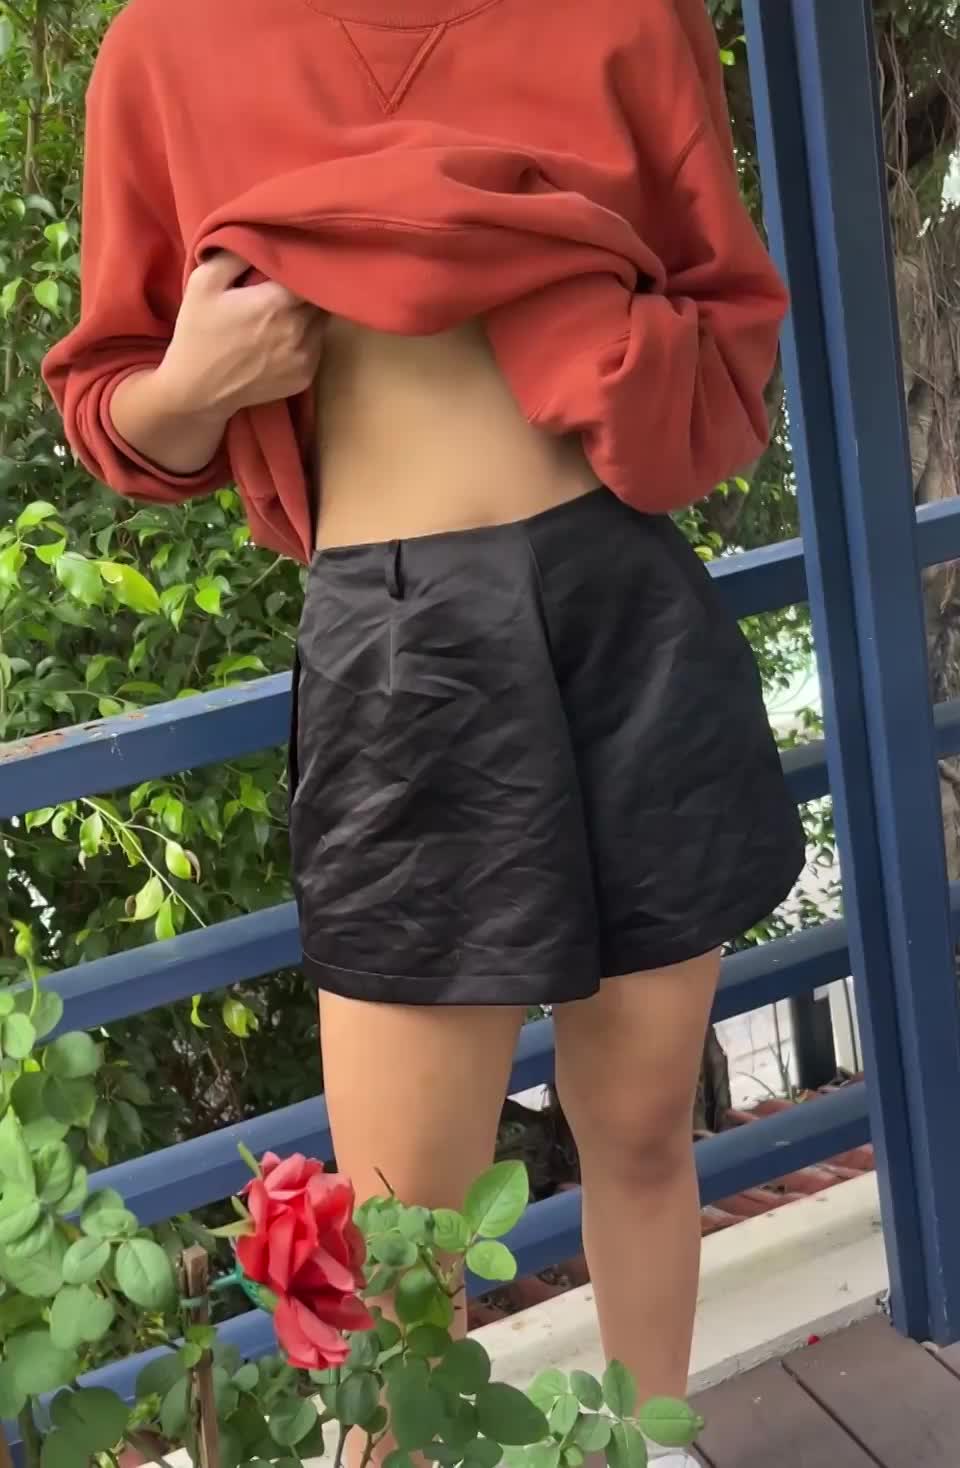 Flashing at the cafe this morning! [GIF] : video clip